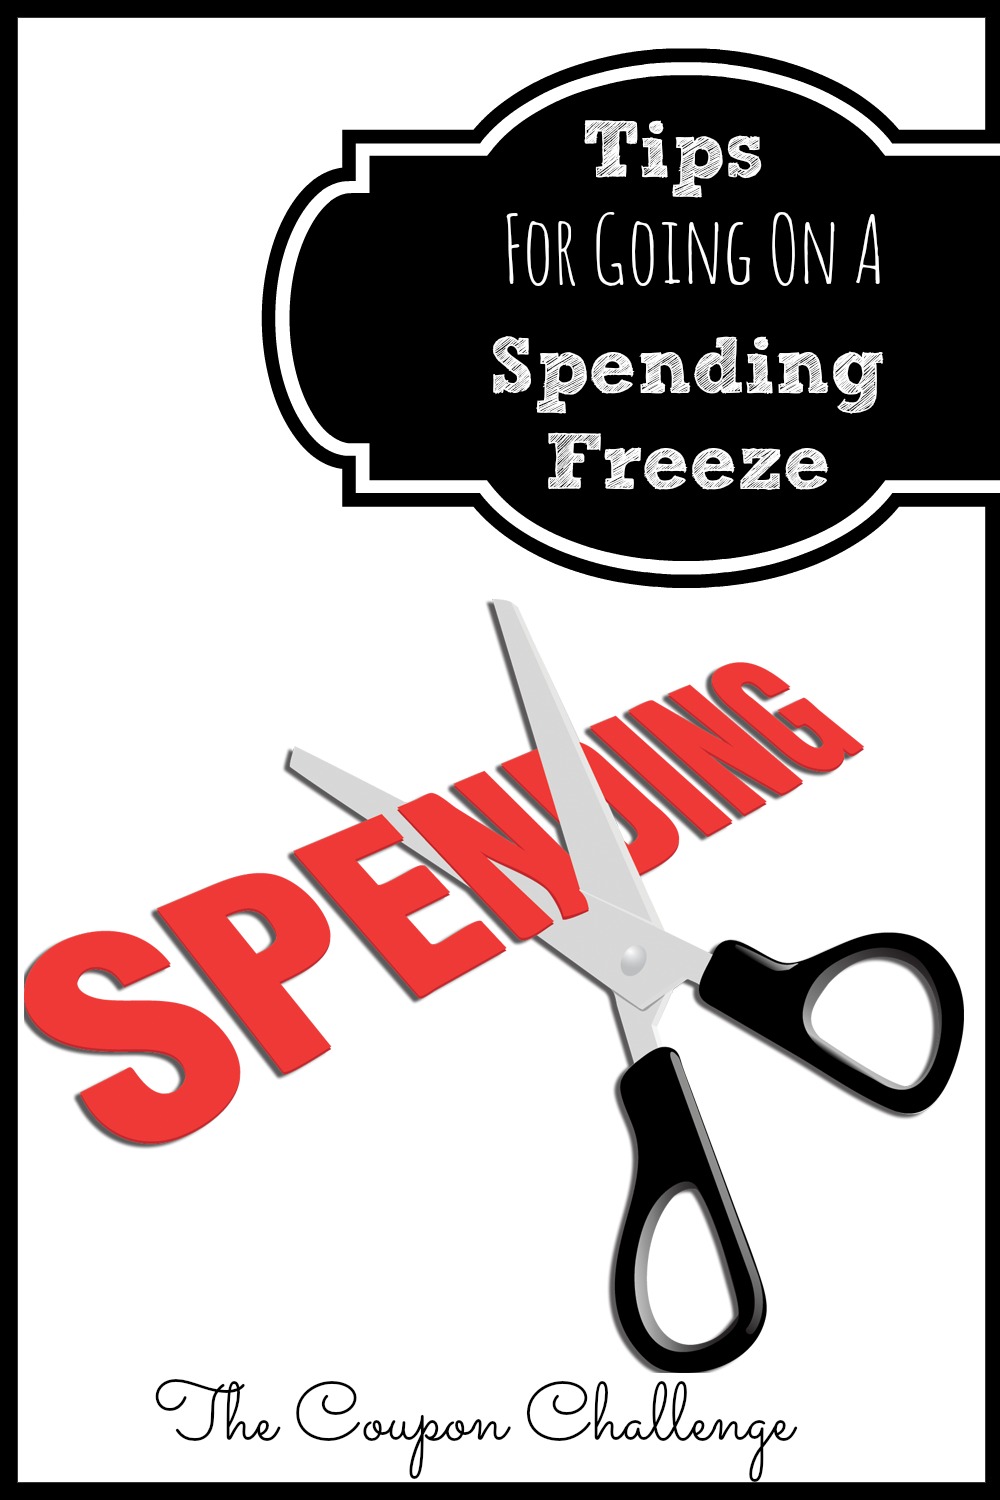 Tips-For-Going-On-A-Spending-Freeze